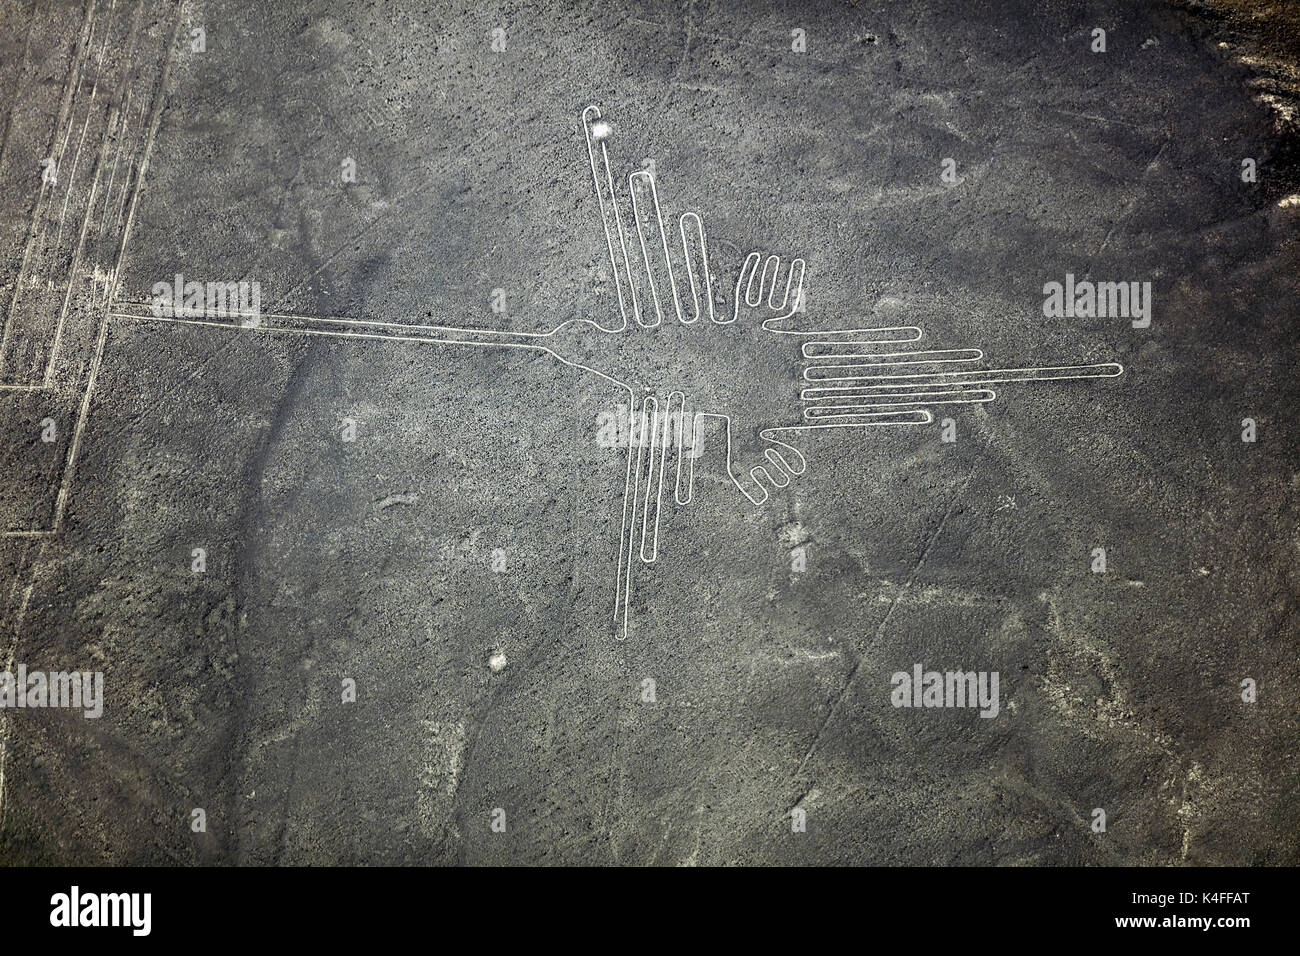 The Hummingbird, Nazca Lines, (ancient geoglyphs and World Heritage Site) in the desert near Nazca, Ica Region, Peru, South America - aerial Stock Photo